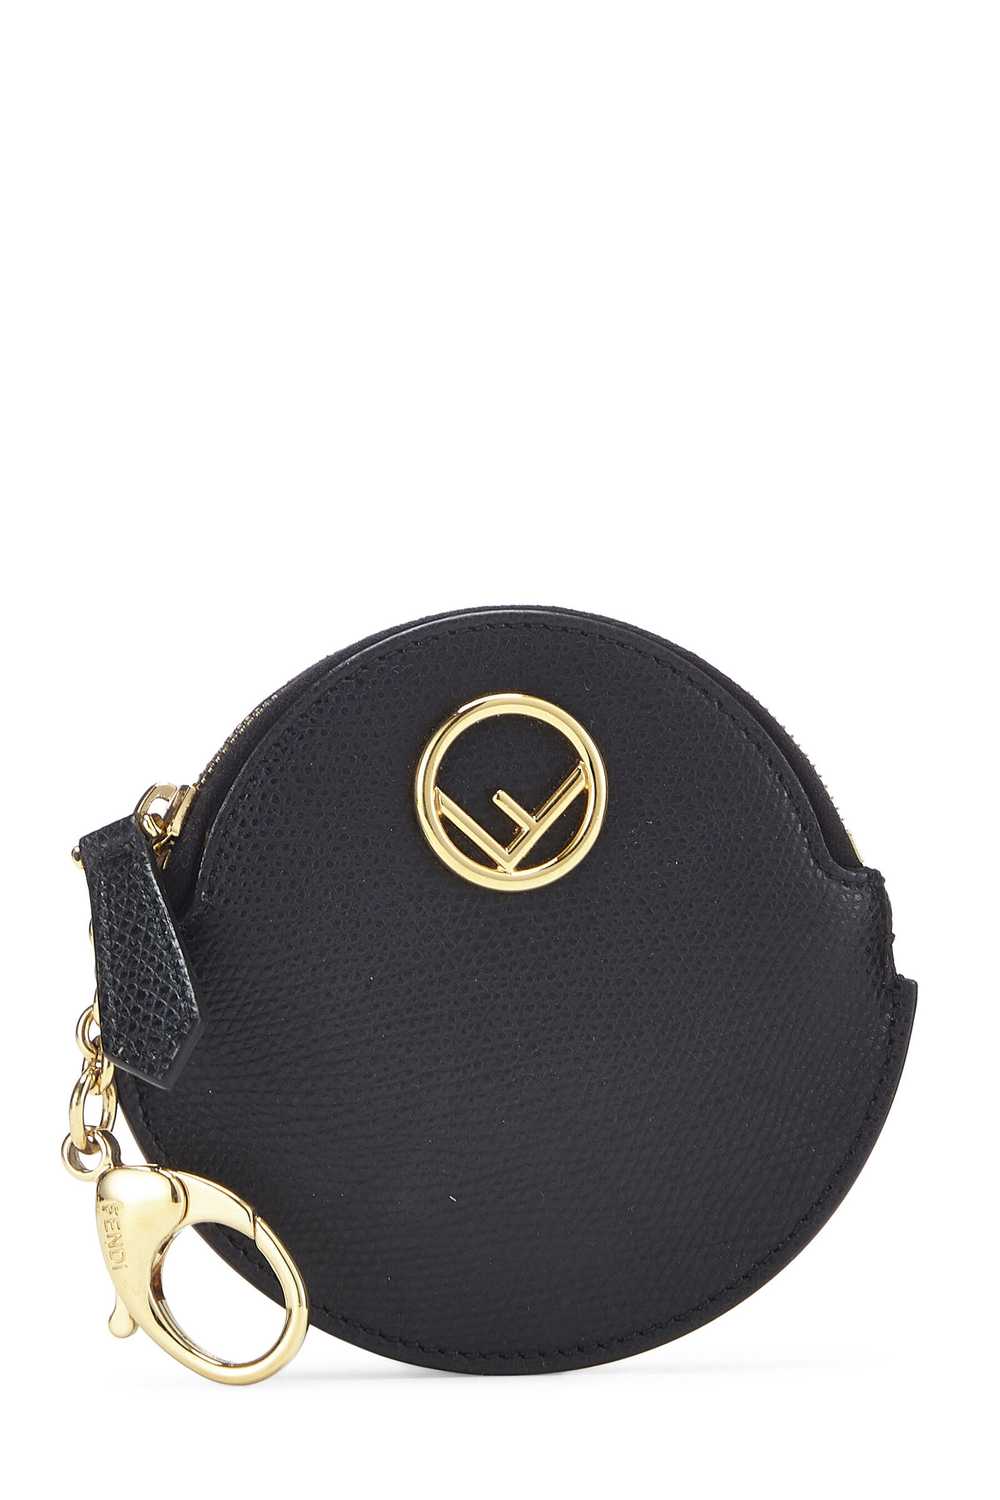 Black Leather Round Coin Purse - image 2